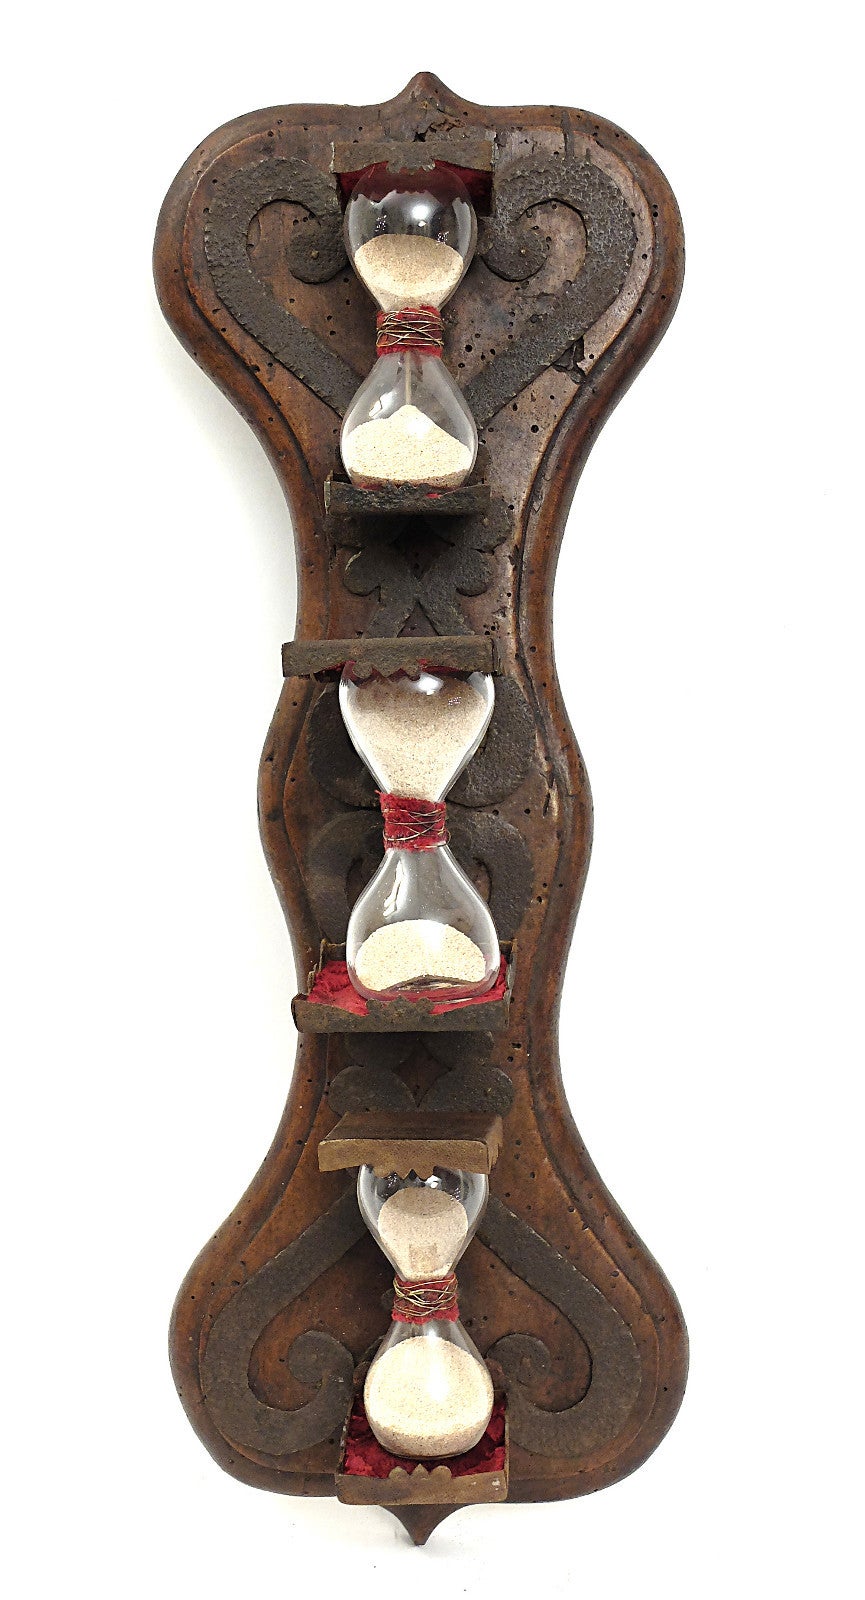 Convent wall hourglass with three bulbs, made out of walnut wood with  iron supports to hold the hourglasses. Inside, the elements are made from blown glass, connected to the center of a ring constructed with fragments of velvet and metal wires.